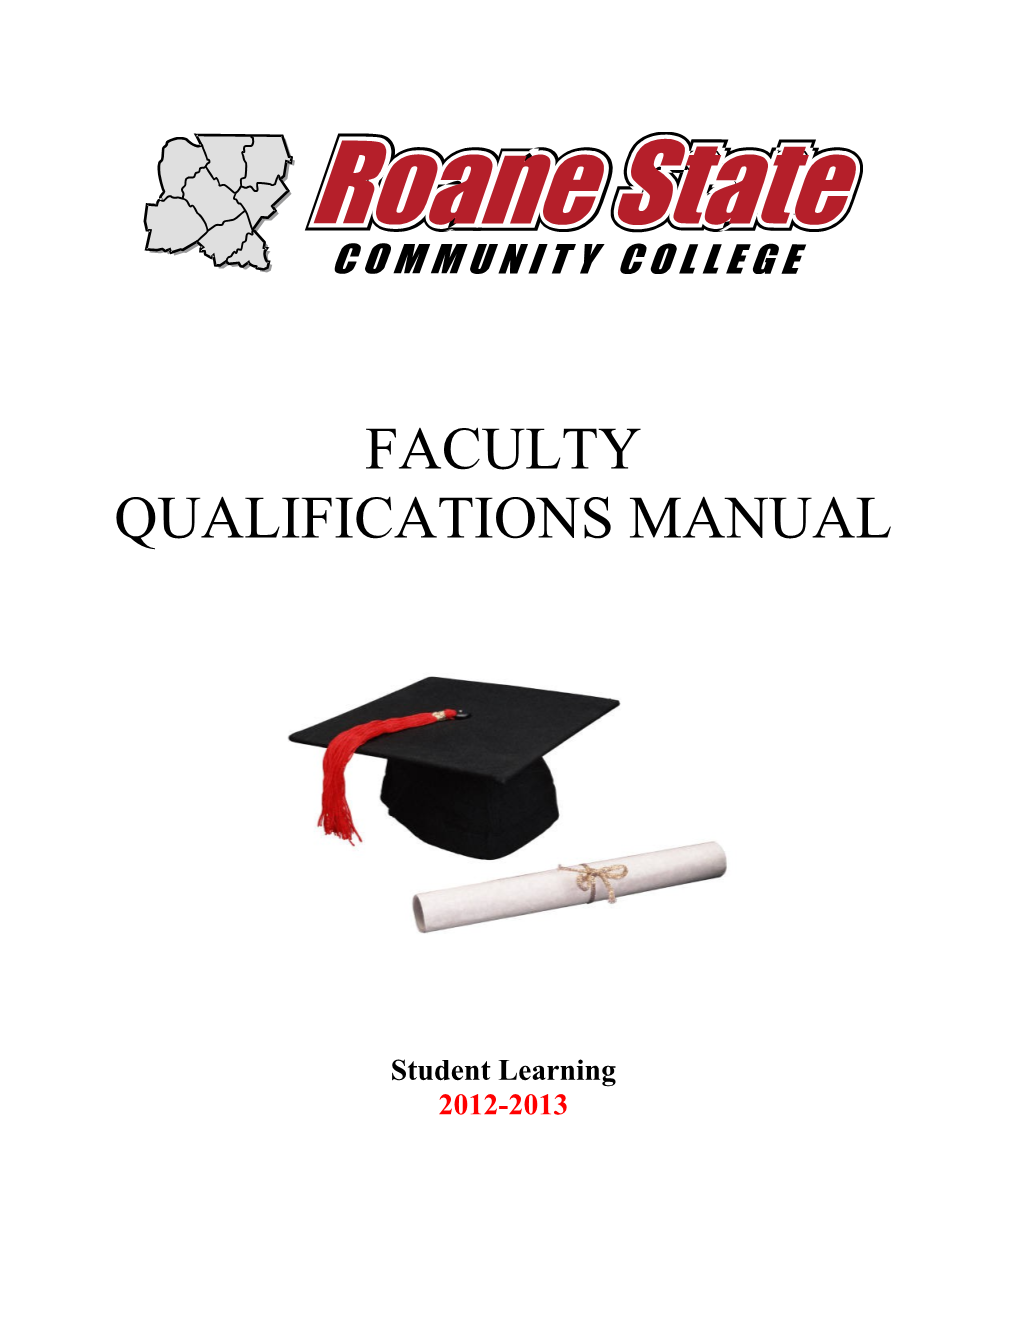 Faculty Qualifications Manual